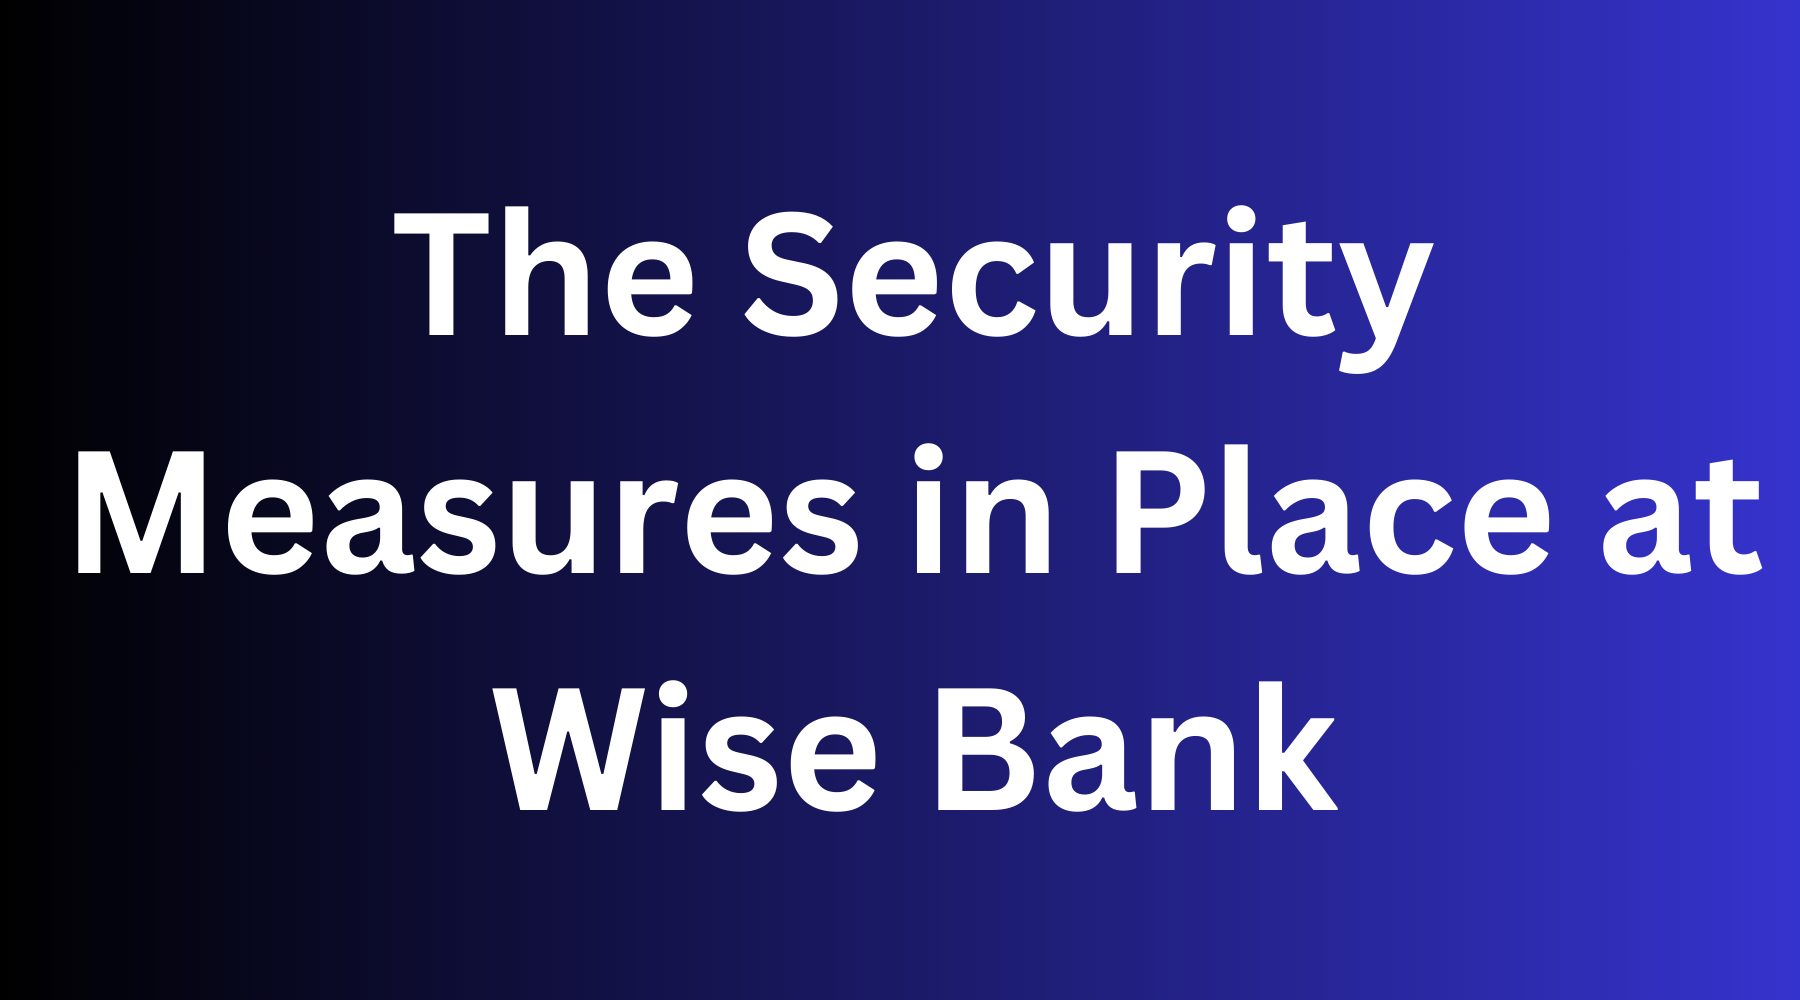 The Security Measures in Place at Wise Bank